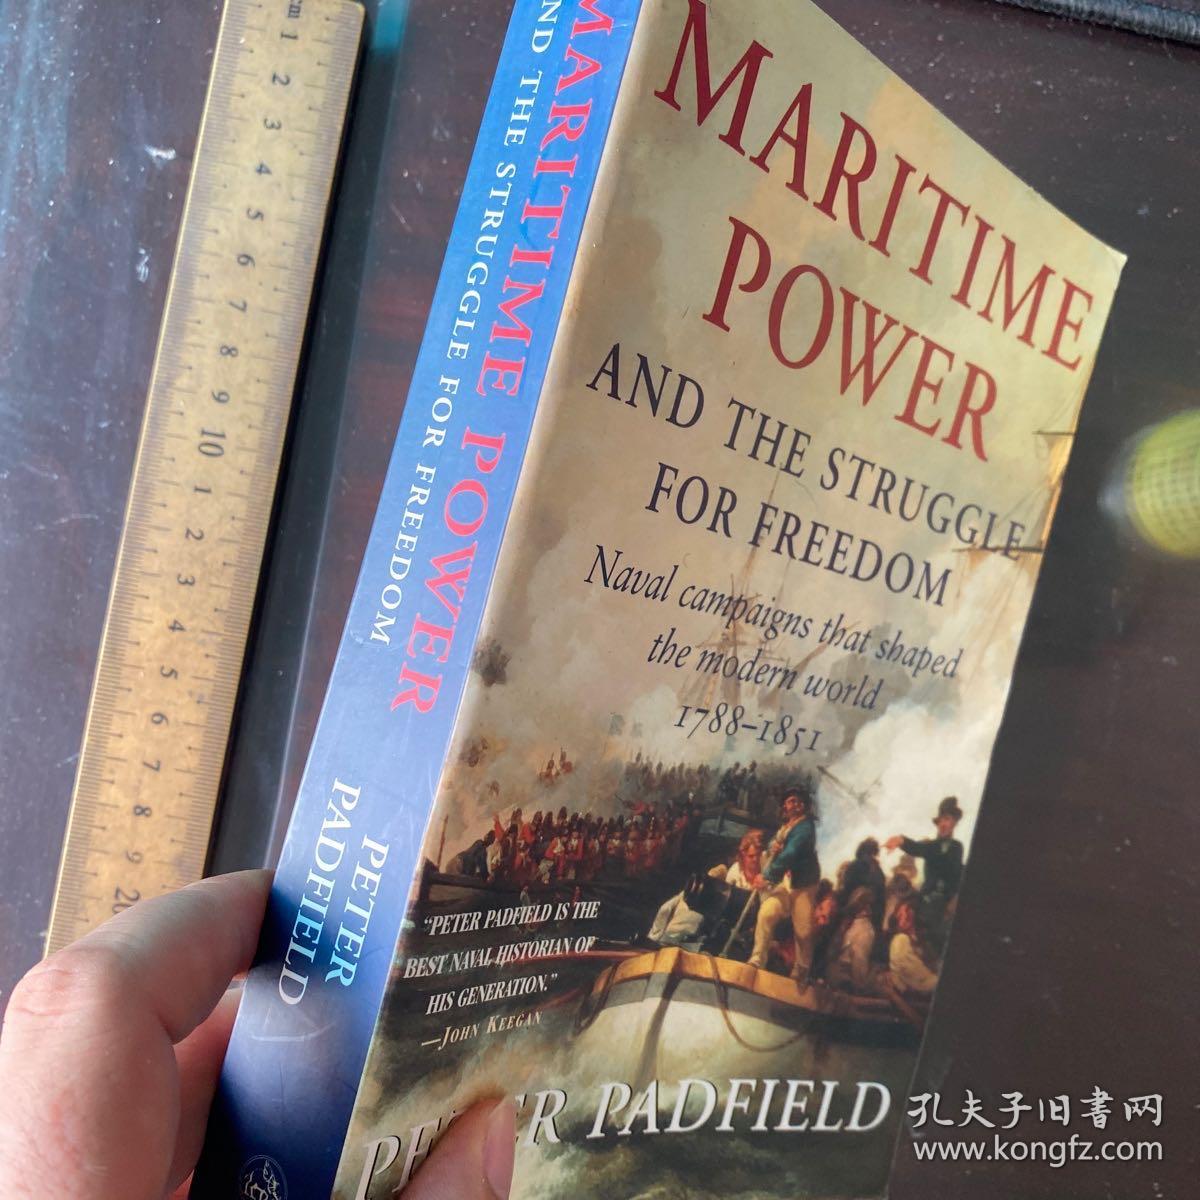 Maritime Power and struggle for freedom naval campaign that shaped the modern world 1788-1851 英文原版